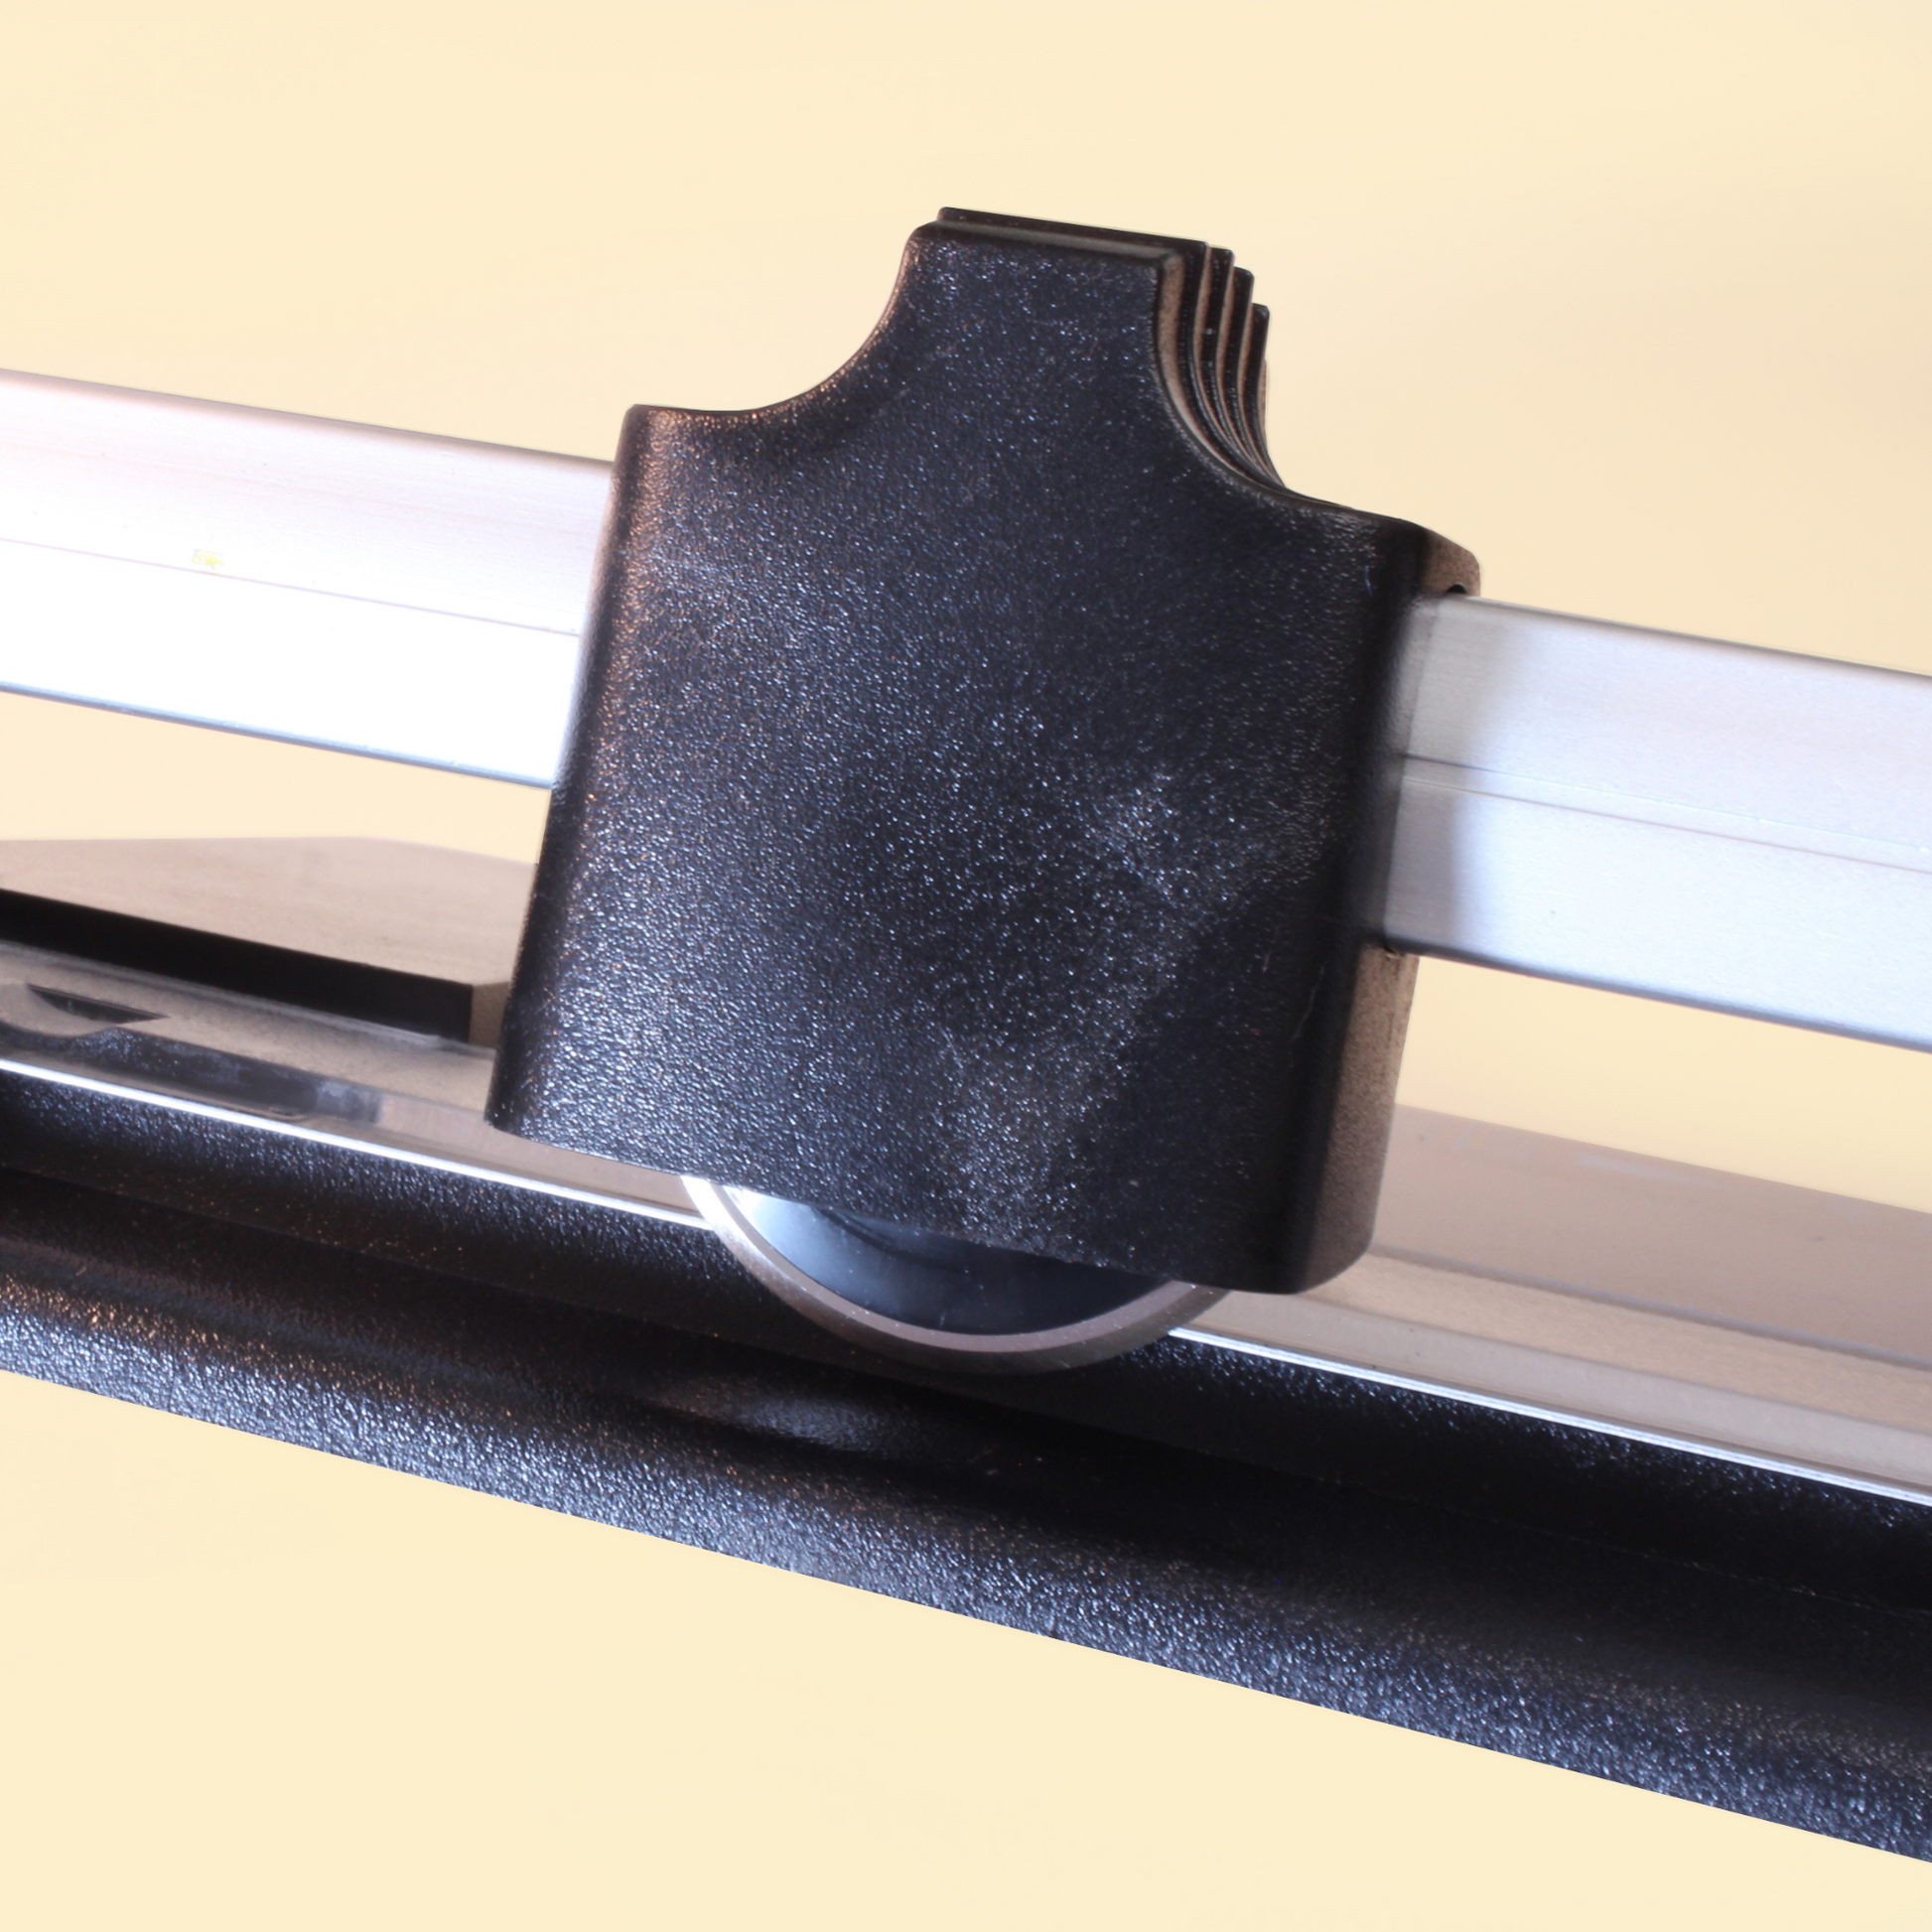 Close-up of the black cutting head on an A3 rotary paper trimmer, showing the ridged edge for a firm grip and the circular blade beneath, set against the metal guide bar for precision in paper trimming.